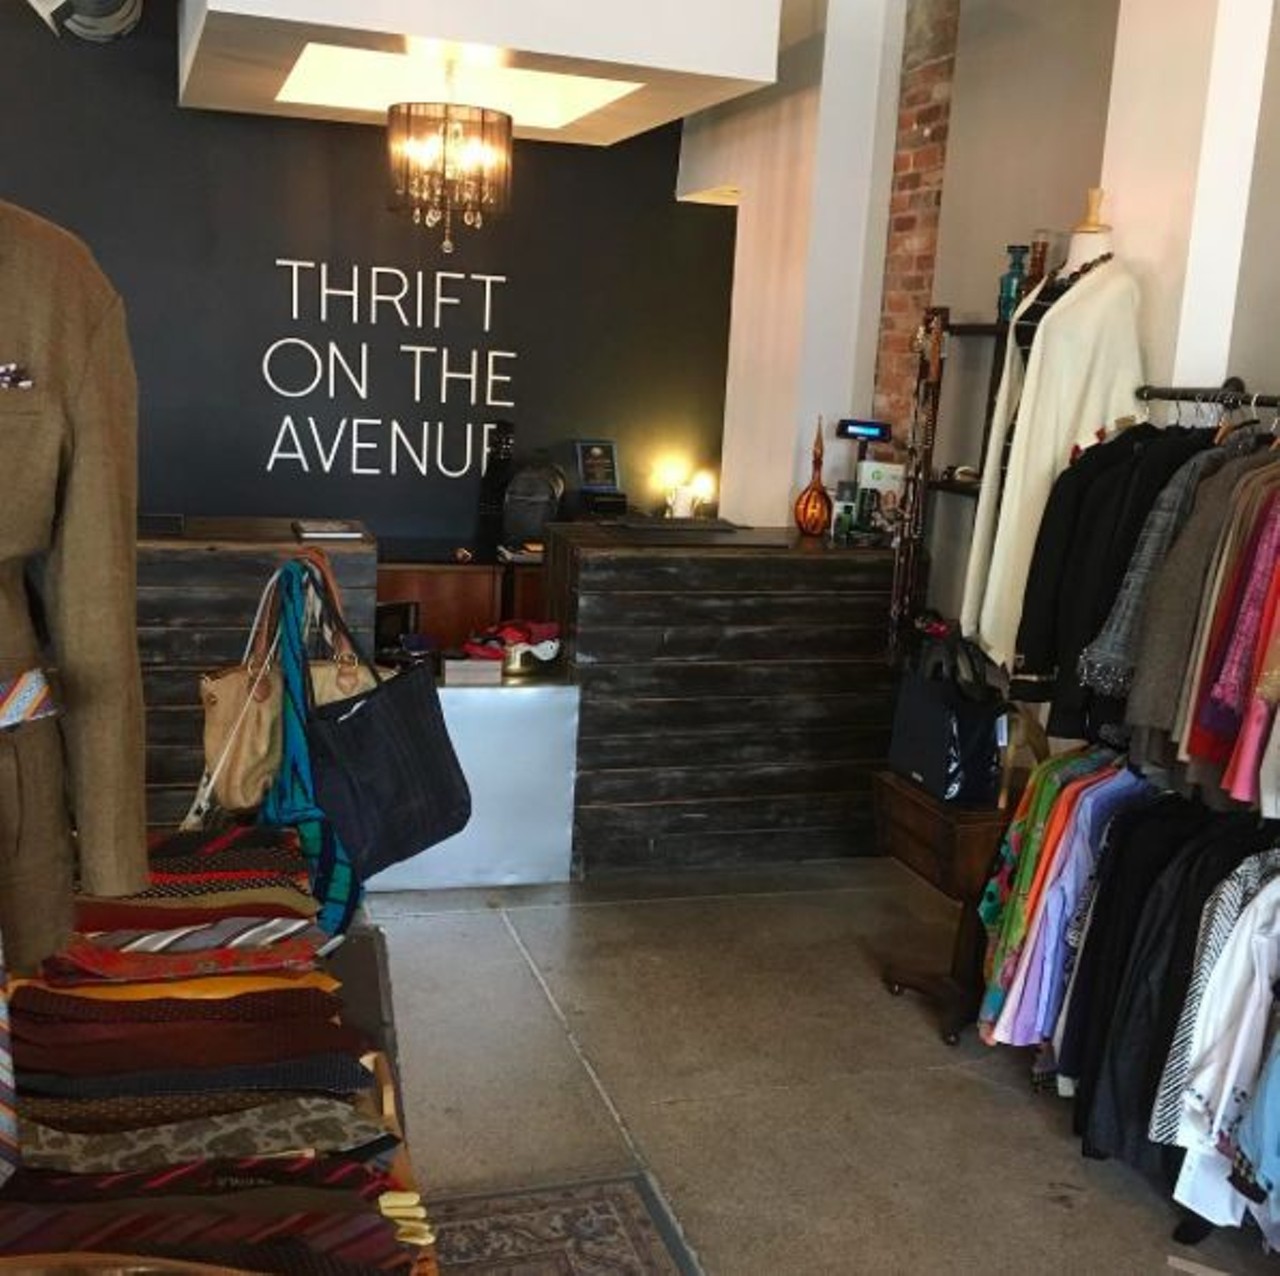 Thrift on the Ave
4130 Cass Ave
A premier resale shop with a very upscale feel. Located in Midtown, the owner's mission is to create an experience that redefines the normal resale shopping experience. The small, but upscale shop includes  unique and avant-garde pieces that make this place a &nbsp;total winner!
(photo courtesy of Thrift on the Ave Facebook page)